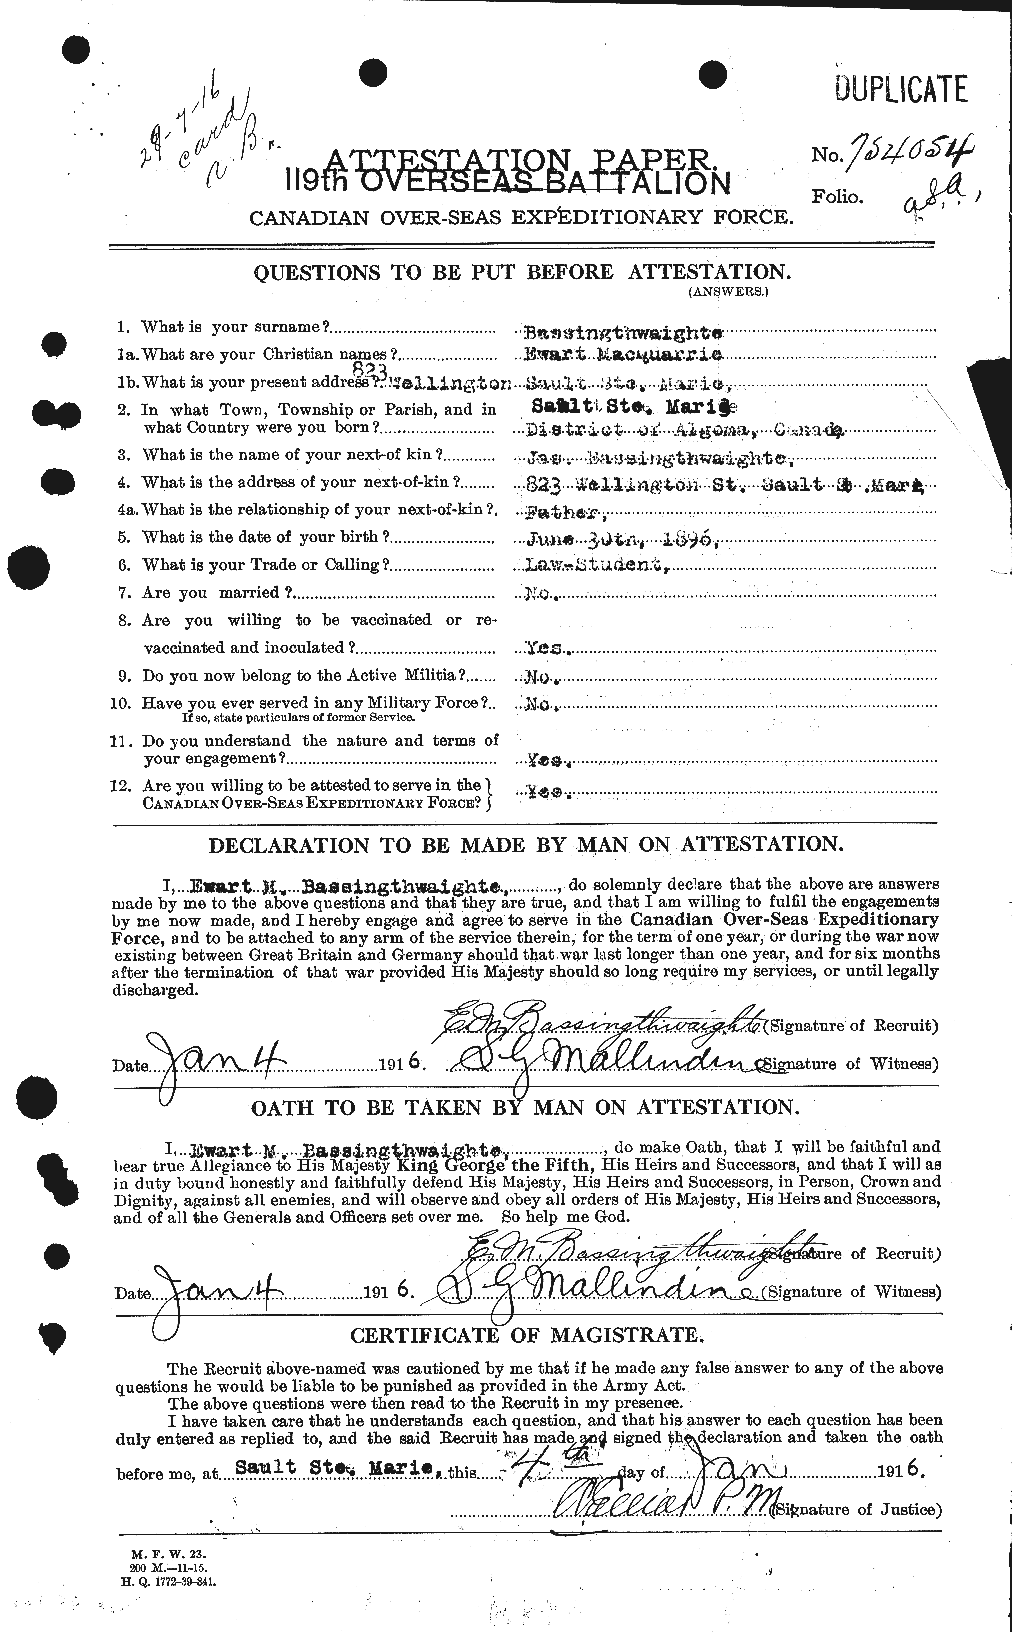 Personnel Records of the First World War - CEF 228315a